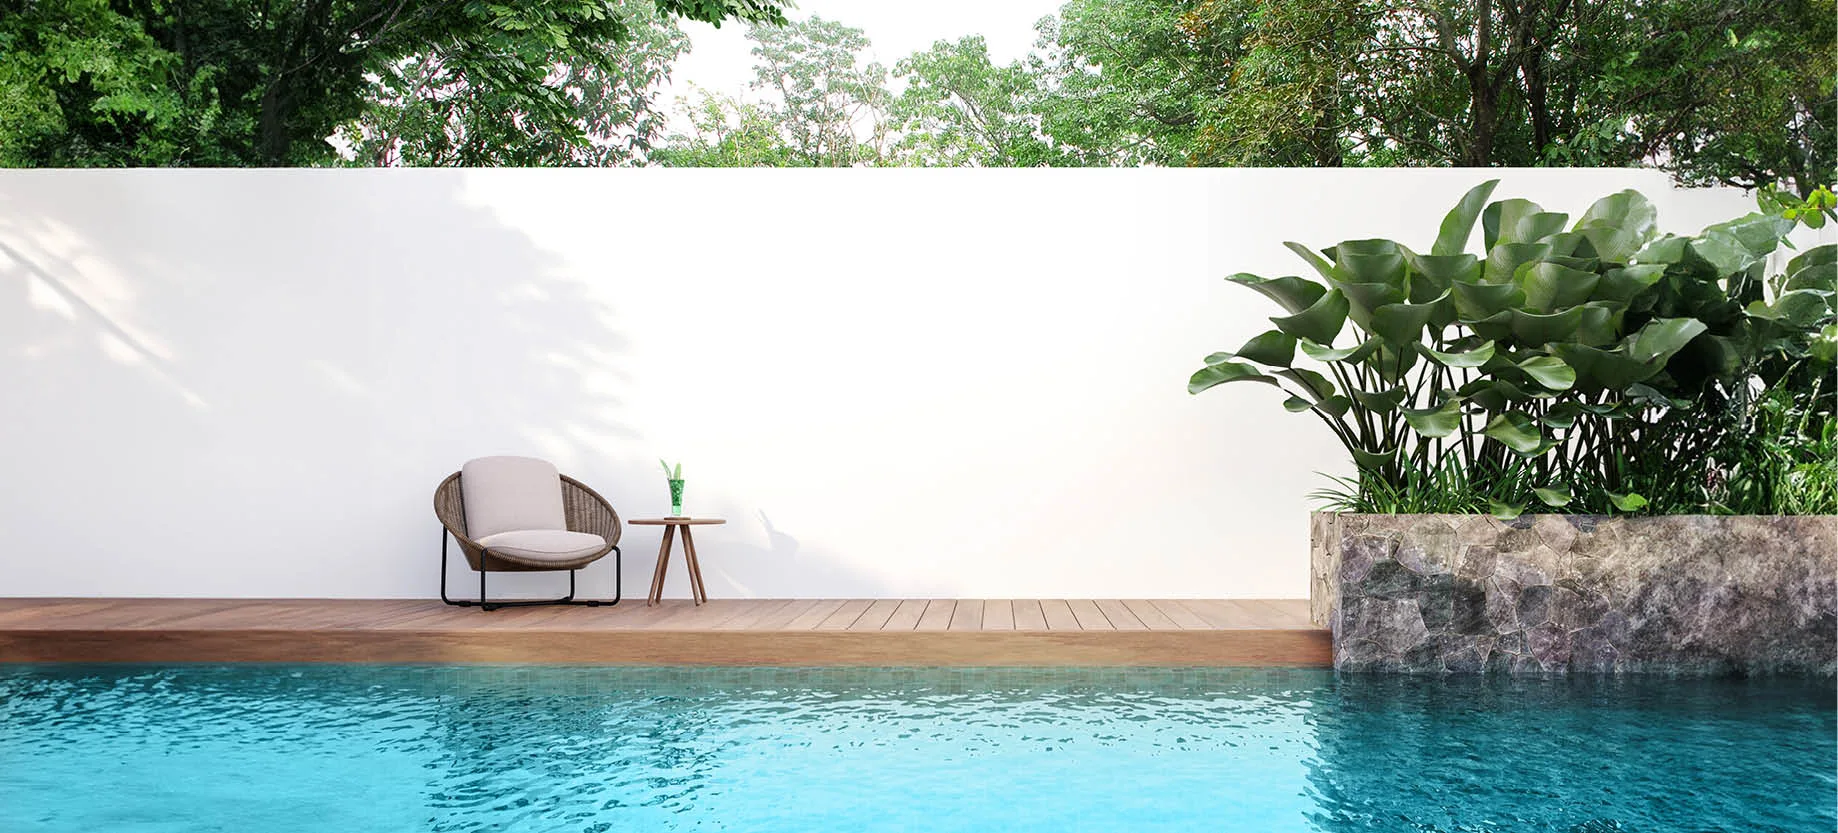 choose plants that aren't messy for around the pool